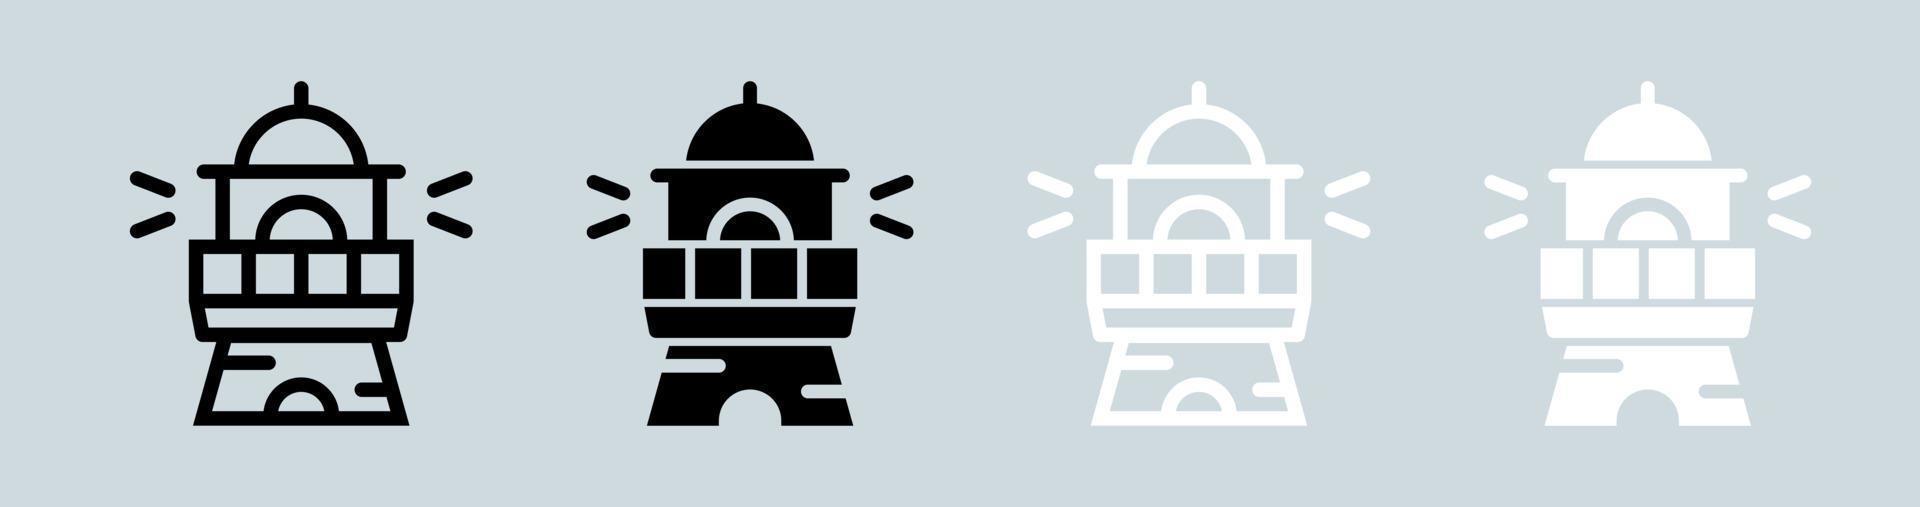 Lighthouse icon set in black and white colors. Beacon light signs vector illustration.